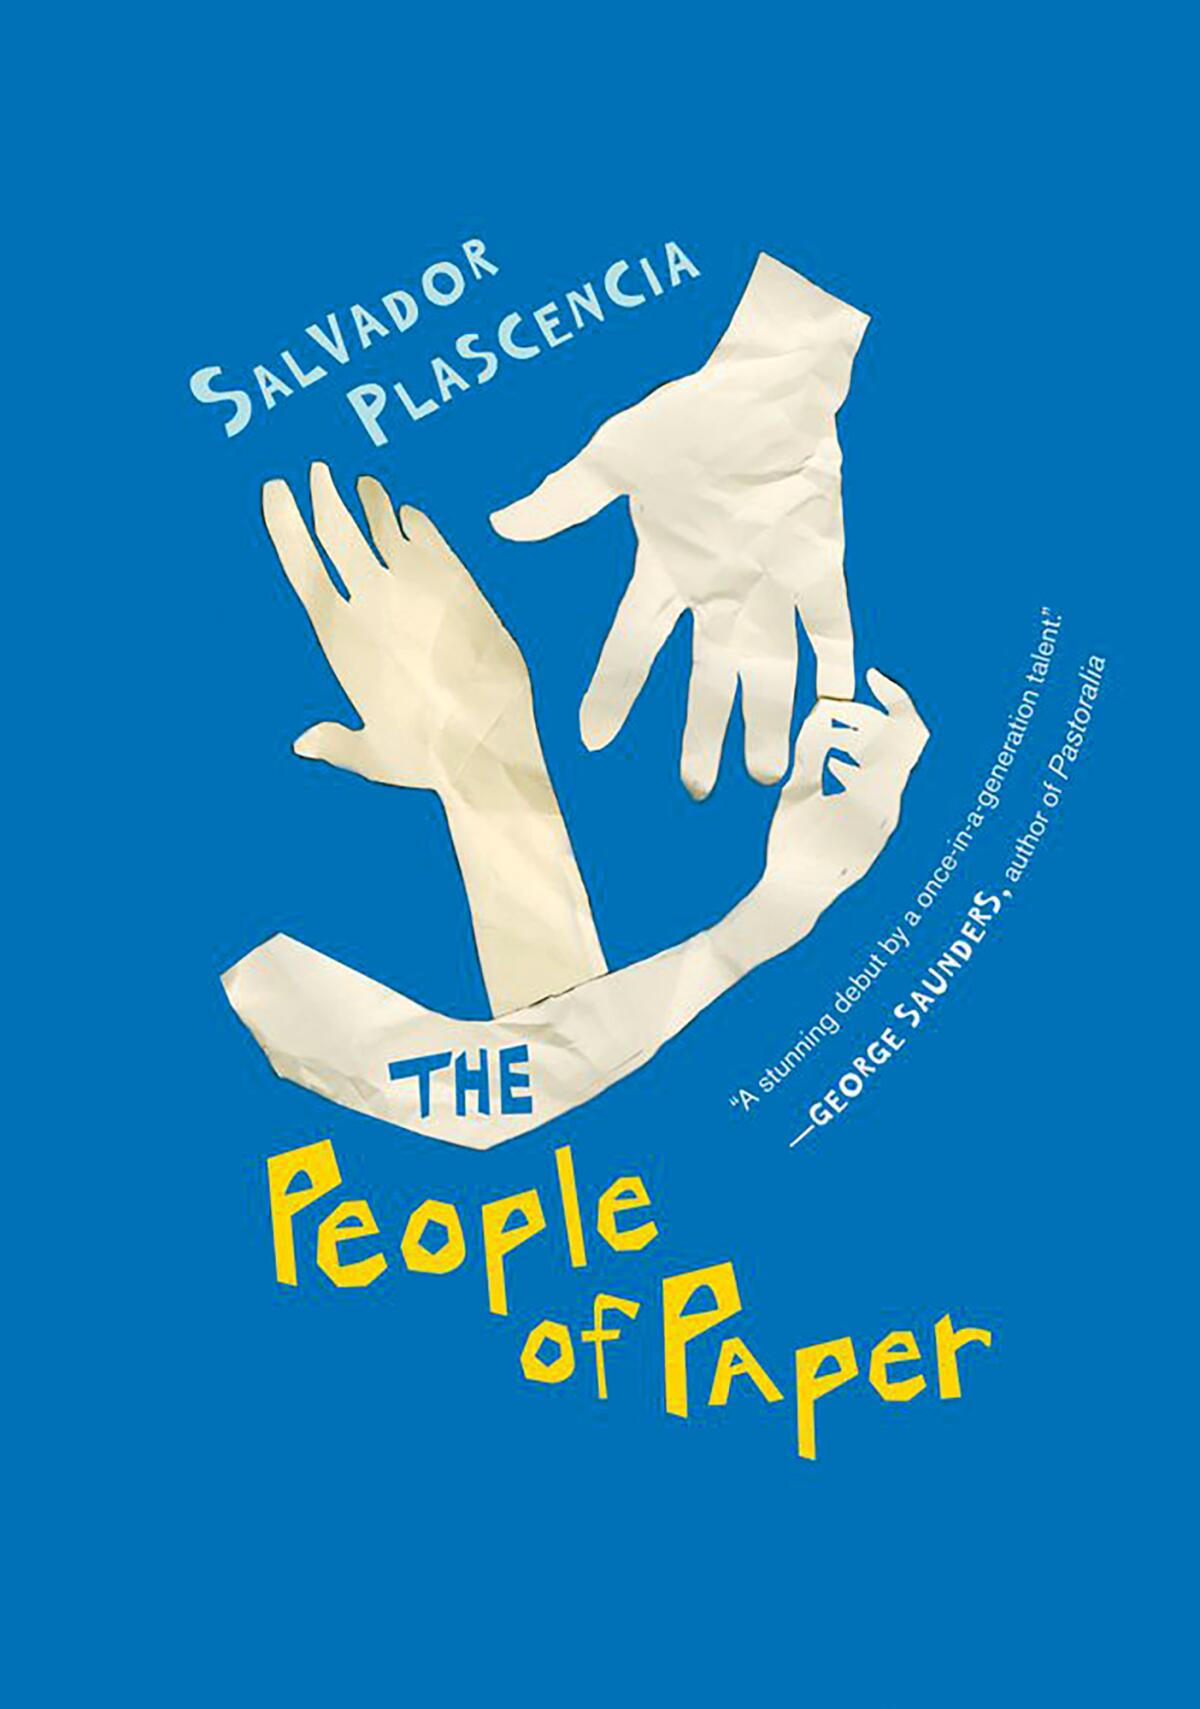 "The People of Paper" by Salvador Plascencia